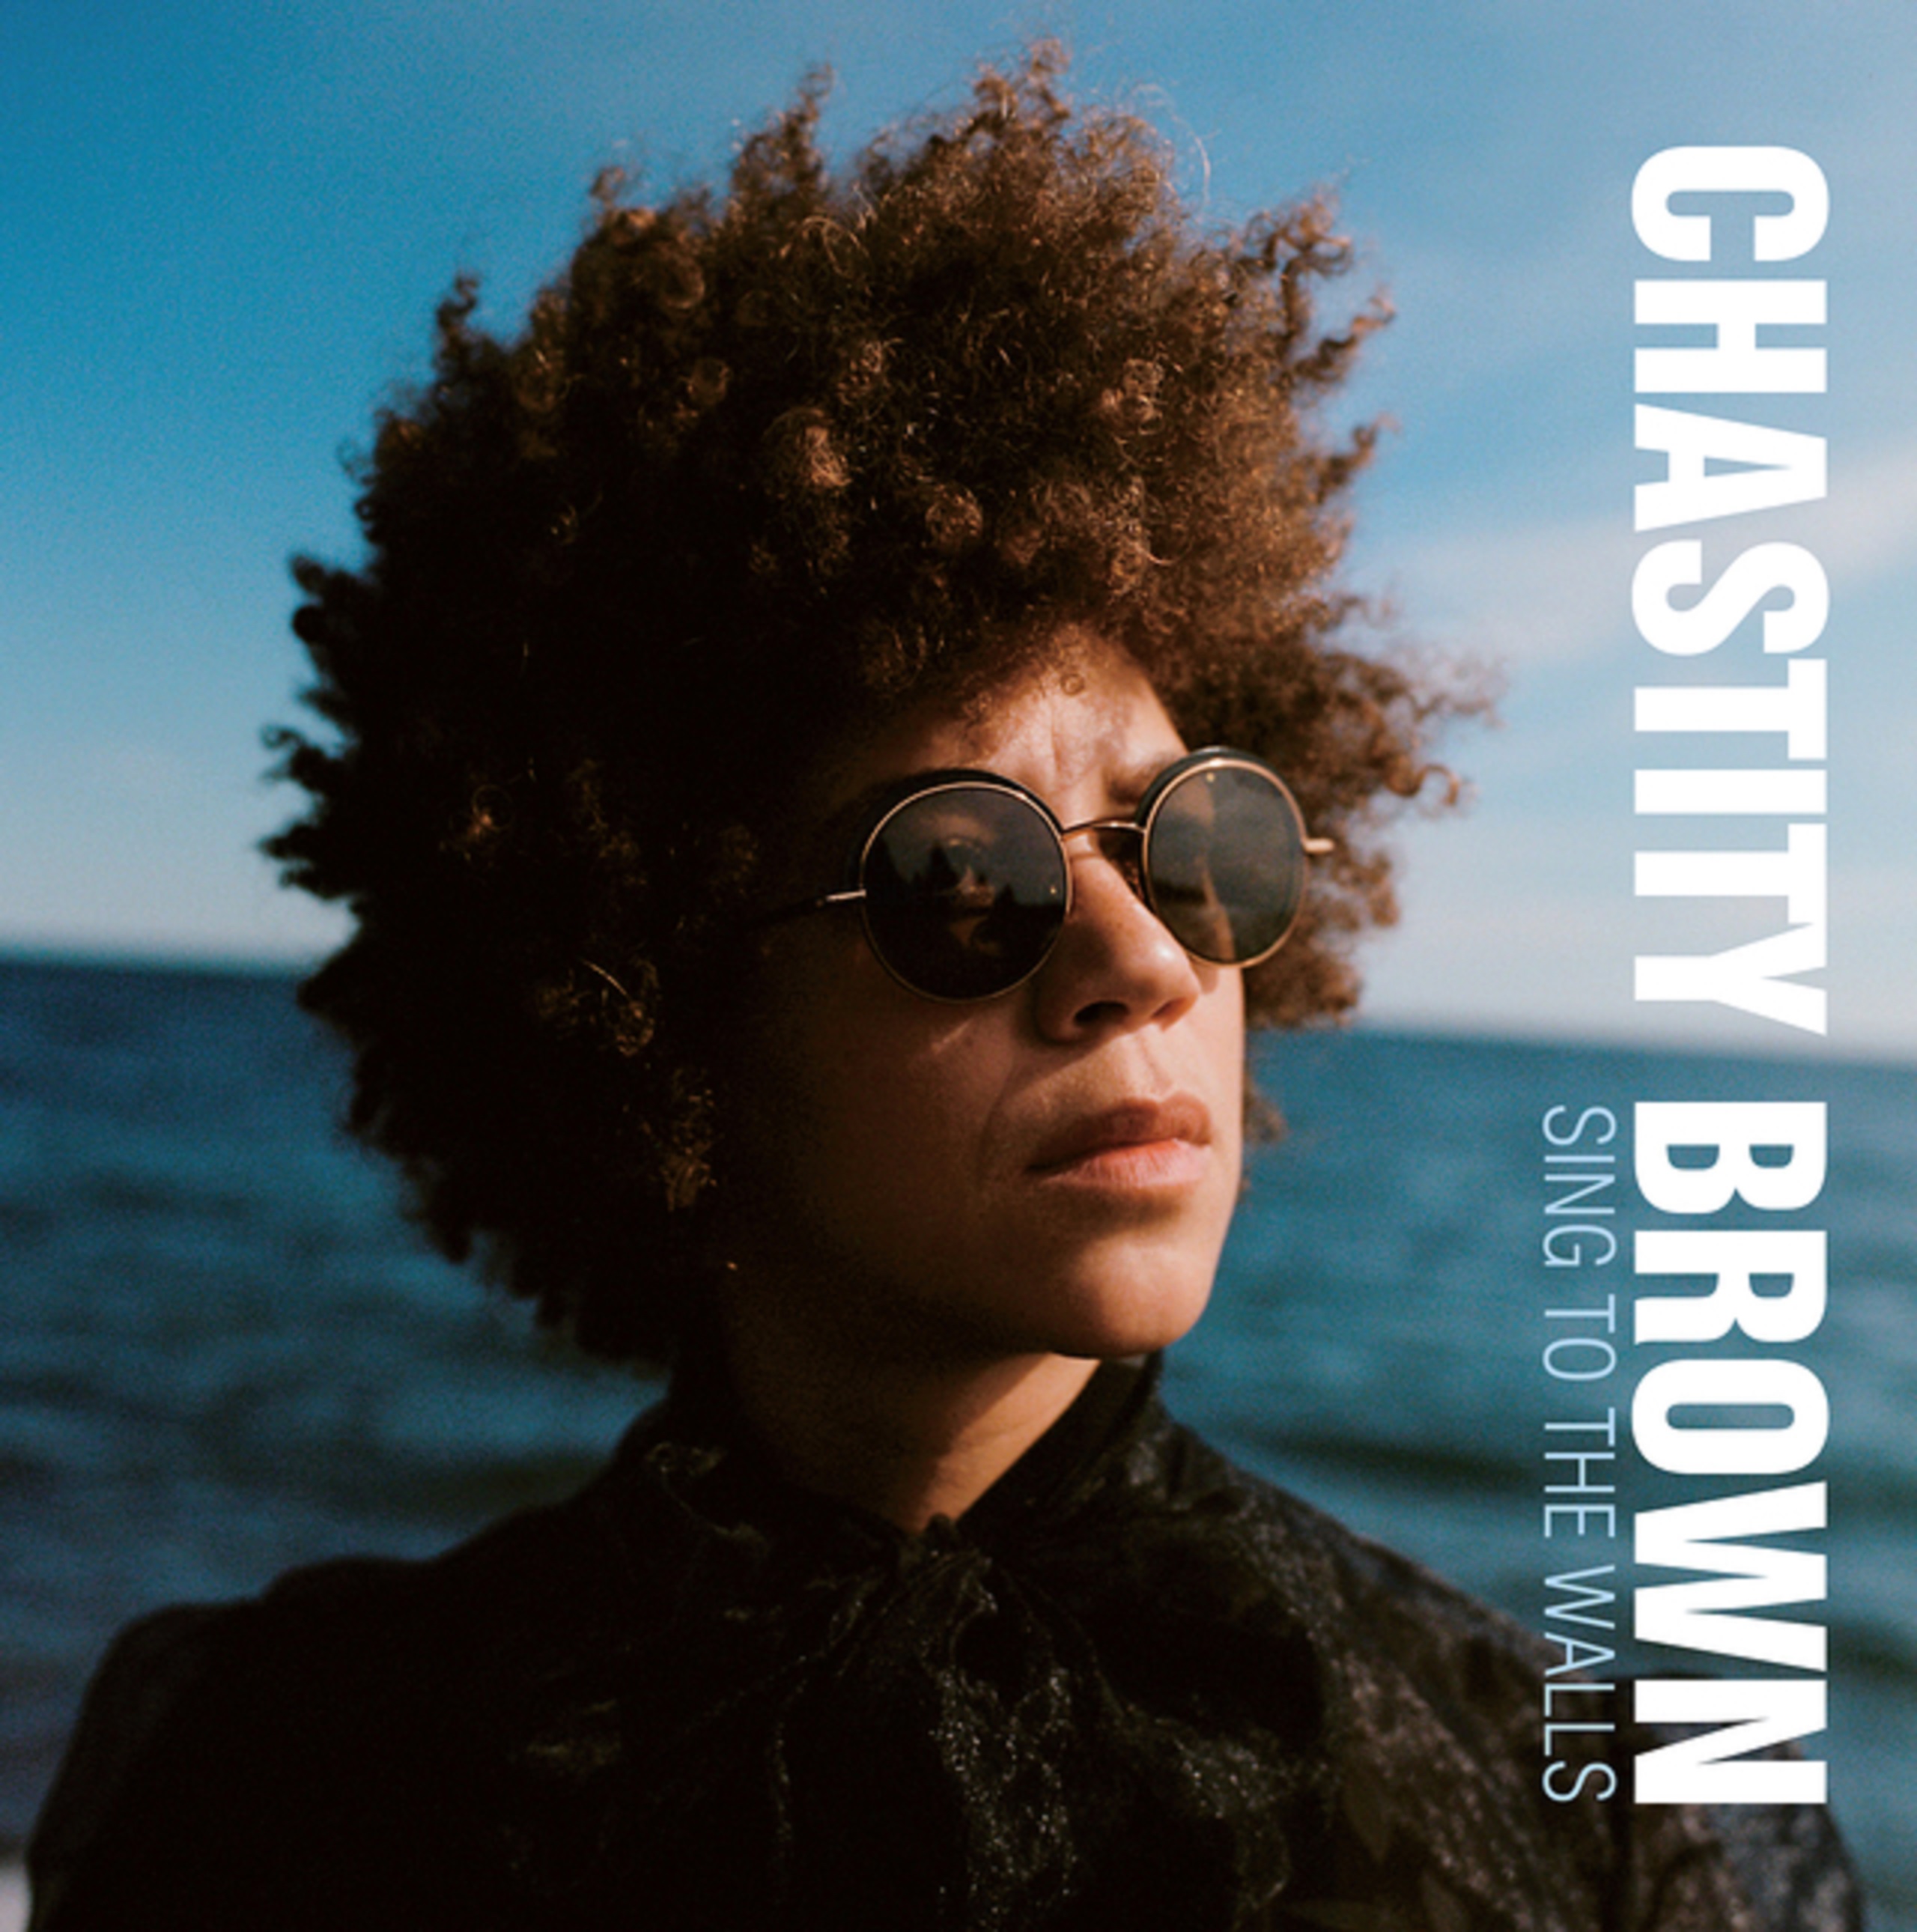 Chastity Brown set to release new album, Sing To The Walls